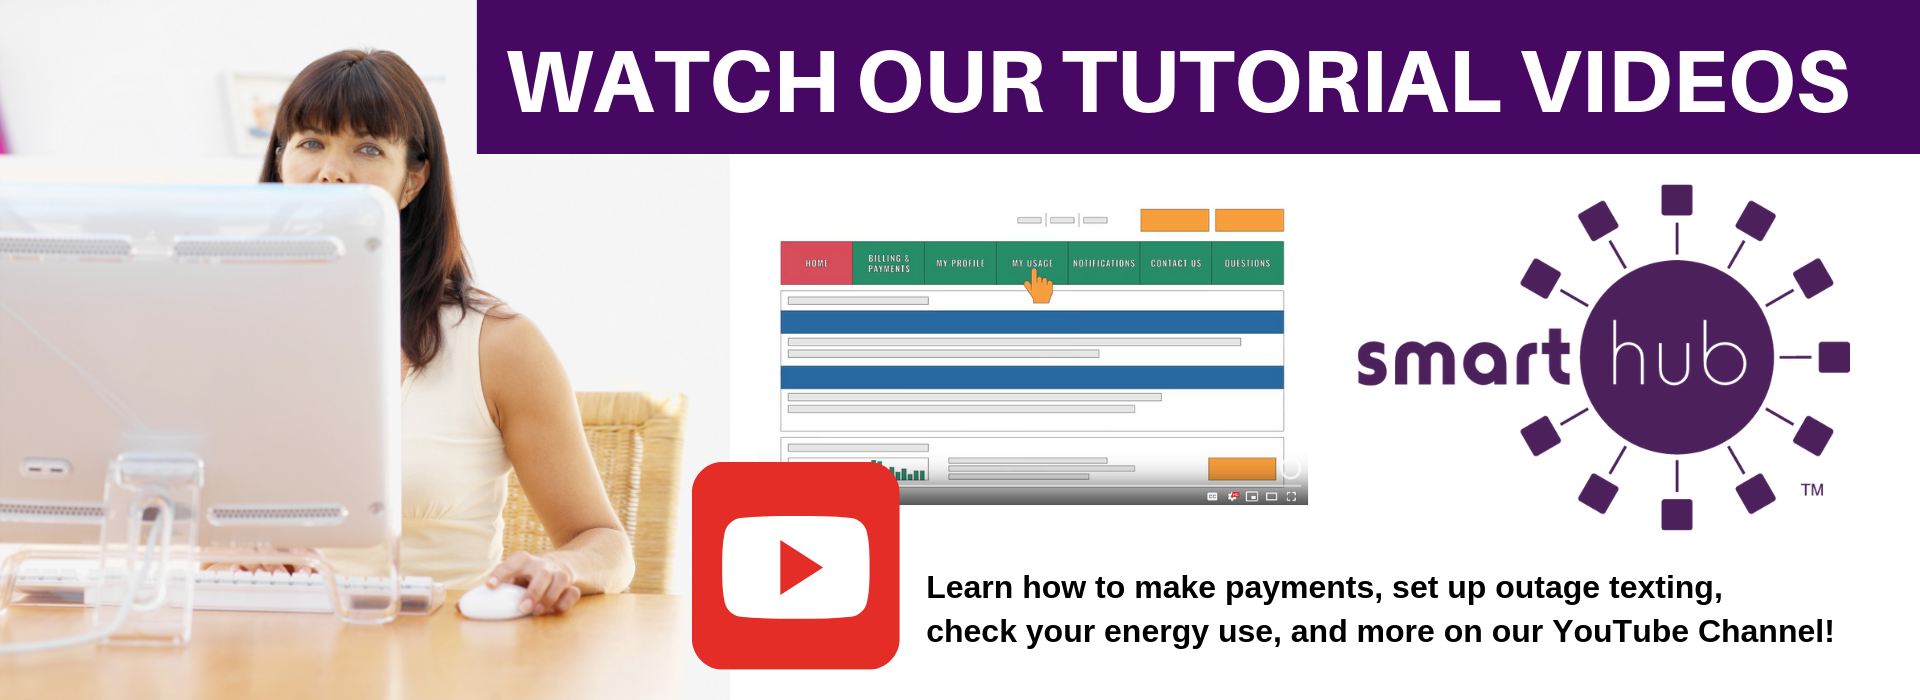 Learn how to fully utilize SmartHub with our tutorial videos!